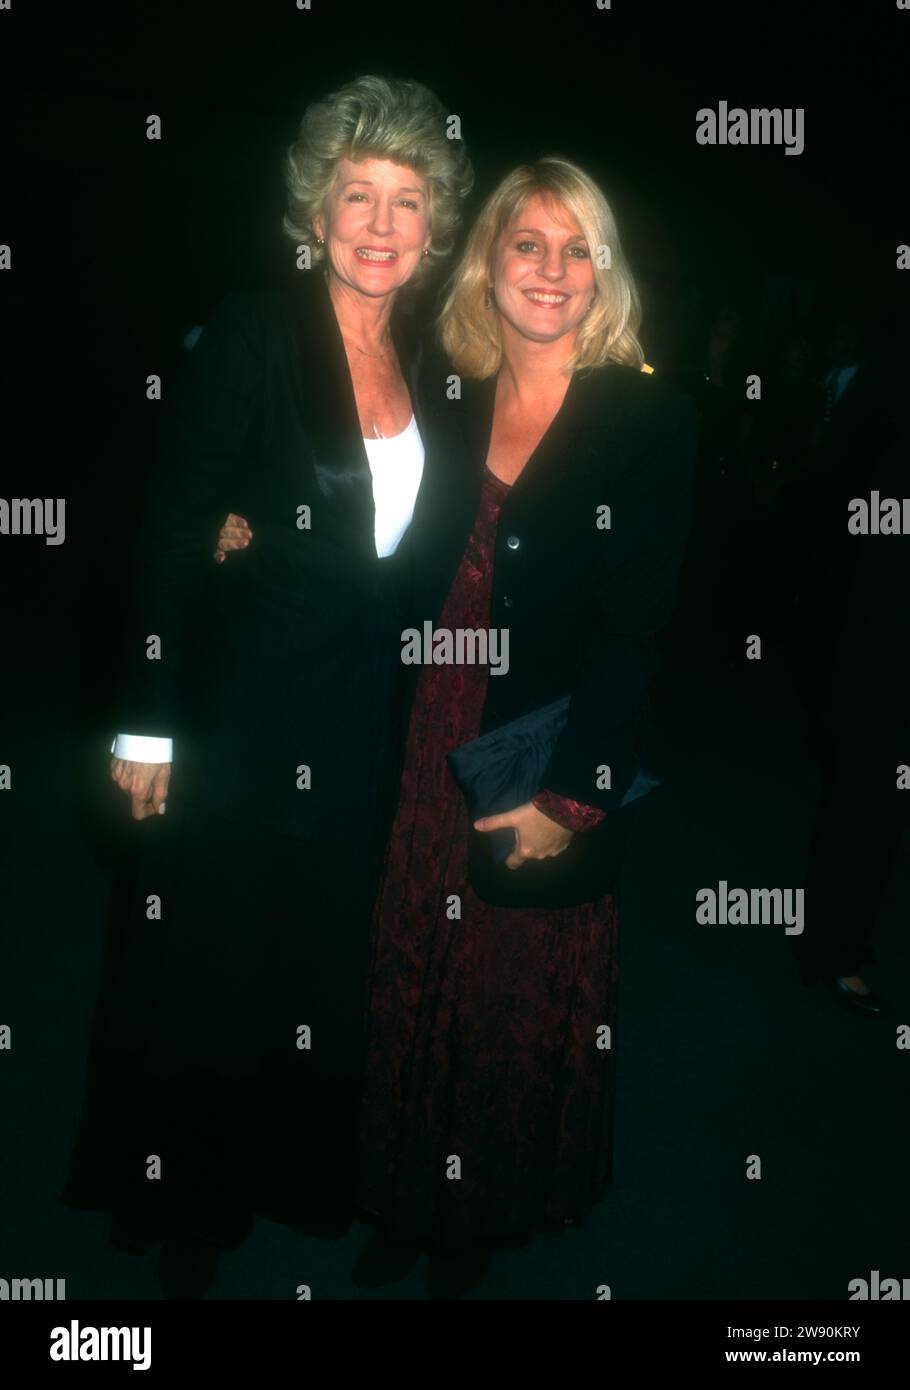 Los Angeles, California, USA 1st October 1996 Georgia Holt and Georganne LaPiere attend HBOÕs If These Walls Could Talk Premiere at DirectorÕs Guild of America on October 1, 1996 in Los Angeles, California, USA. Photo by Barry King/Alamy Stock Photo Stock Photo